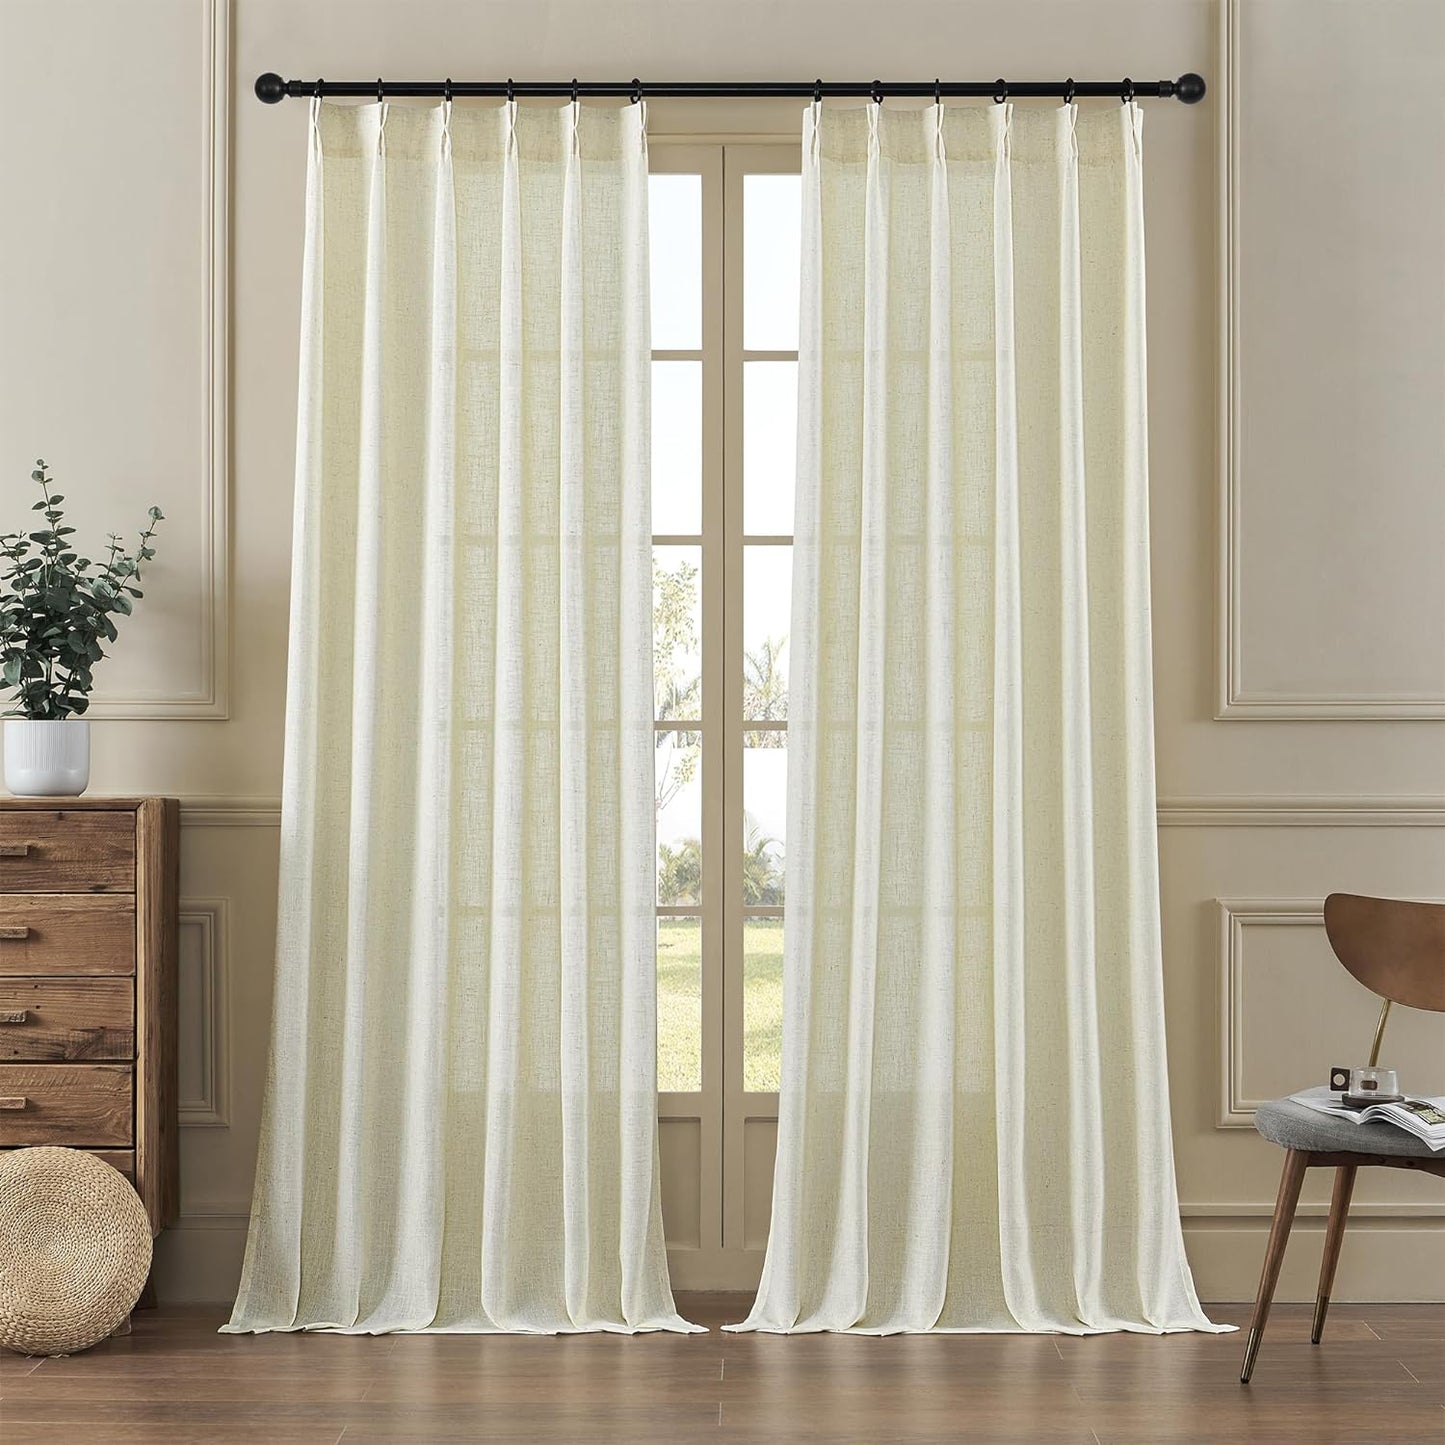 MASWOND White Pinch Pleated Curtains 90 Inches Long 2 Panels for Living Room Semi Sheer Linen Curtains Pinch Pleat Drapes for Traverse Rod Light Filtering Curtains for Dining Bedroom W38Xl90 Length  MASWOND Linen 38X108 